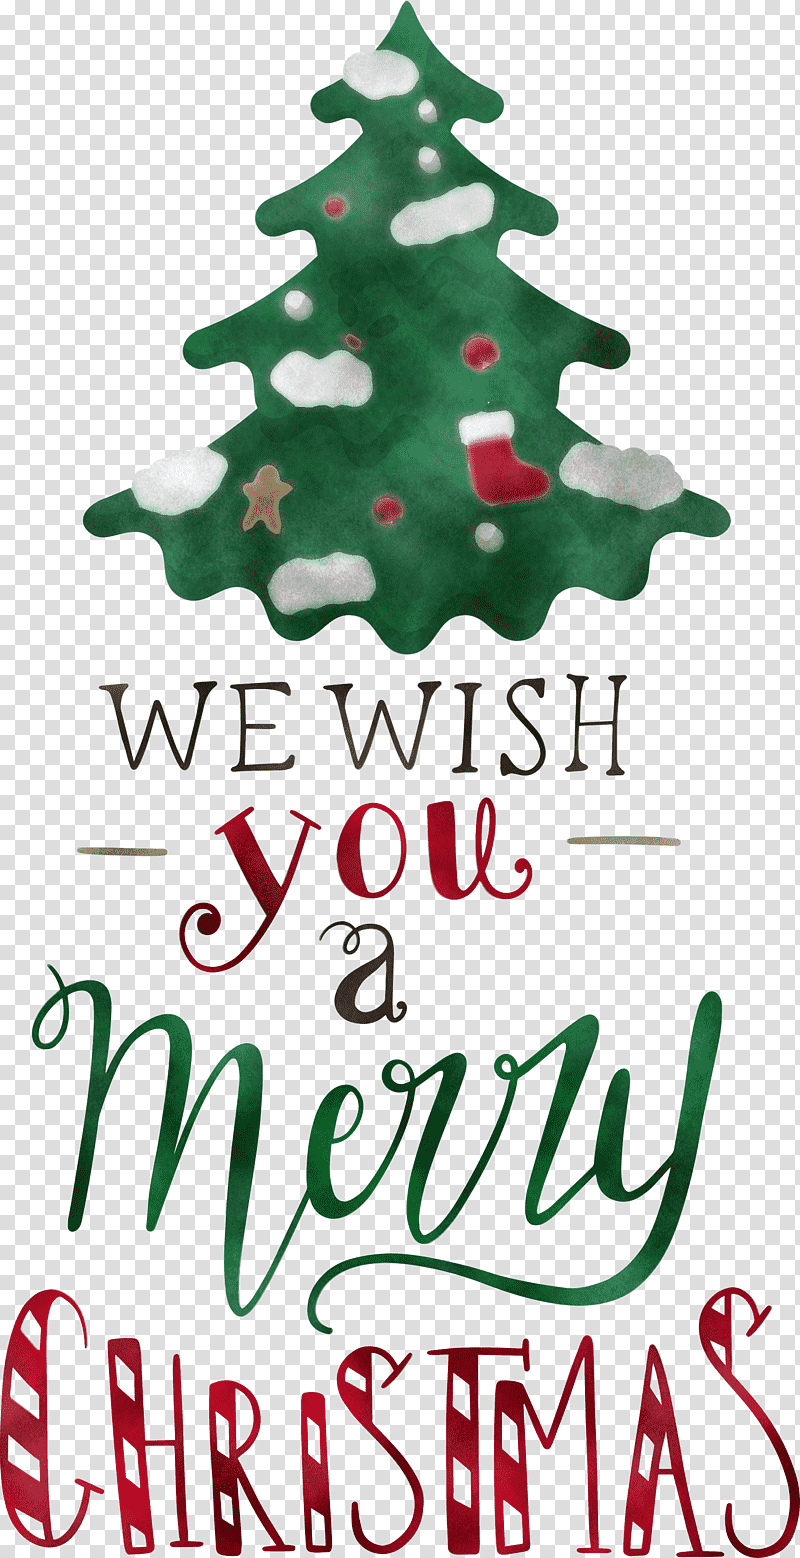 Merry Christmas We Wish You A Merry Christmas, Christmas Tree, Christmas Day, Fir, Holiday Ornament, Christmas Ornament, Christmas Ornament M transparent background PNG clipart